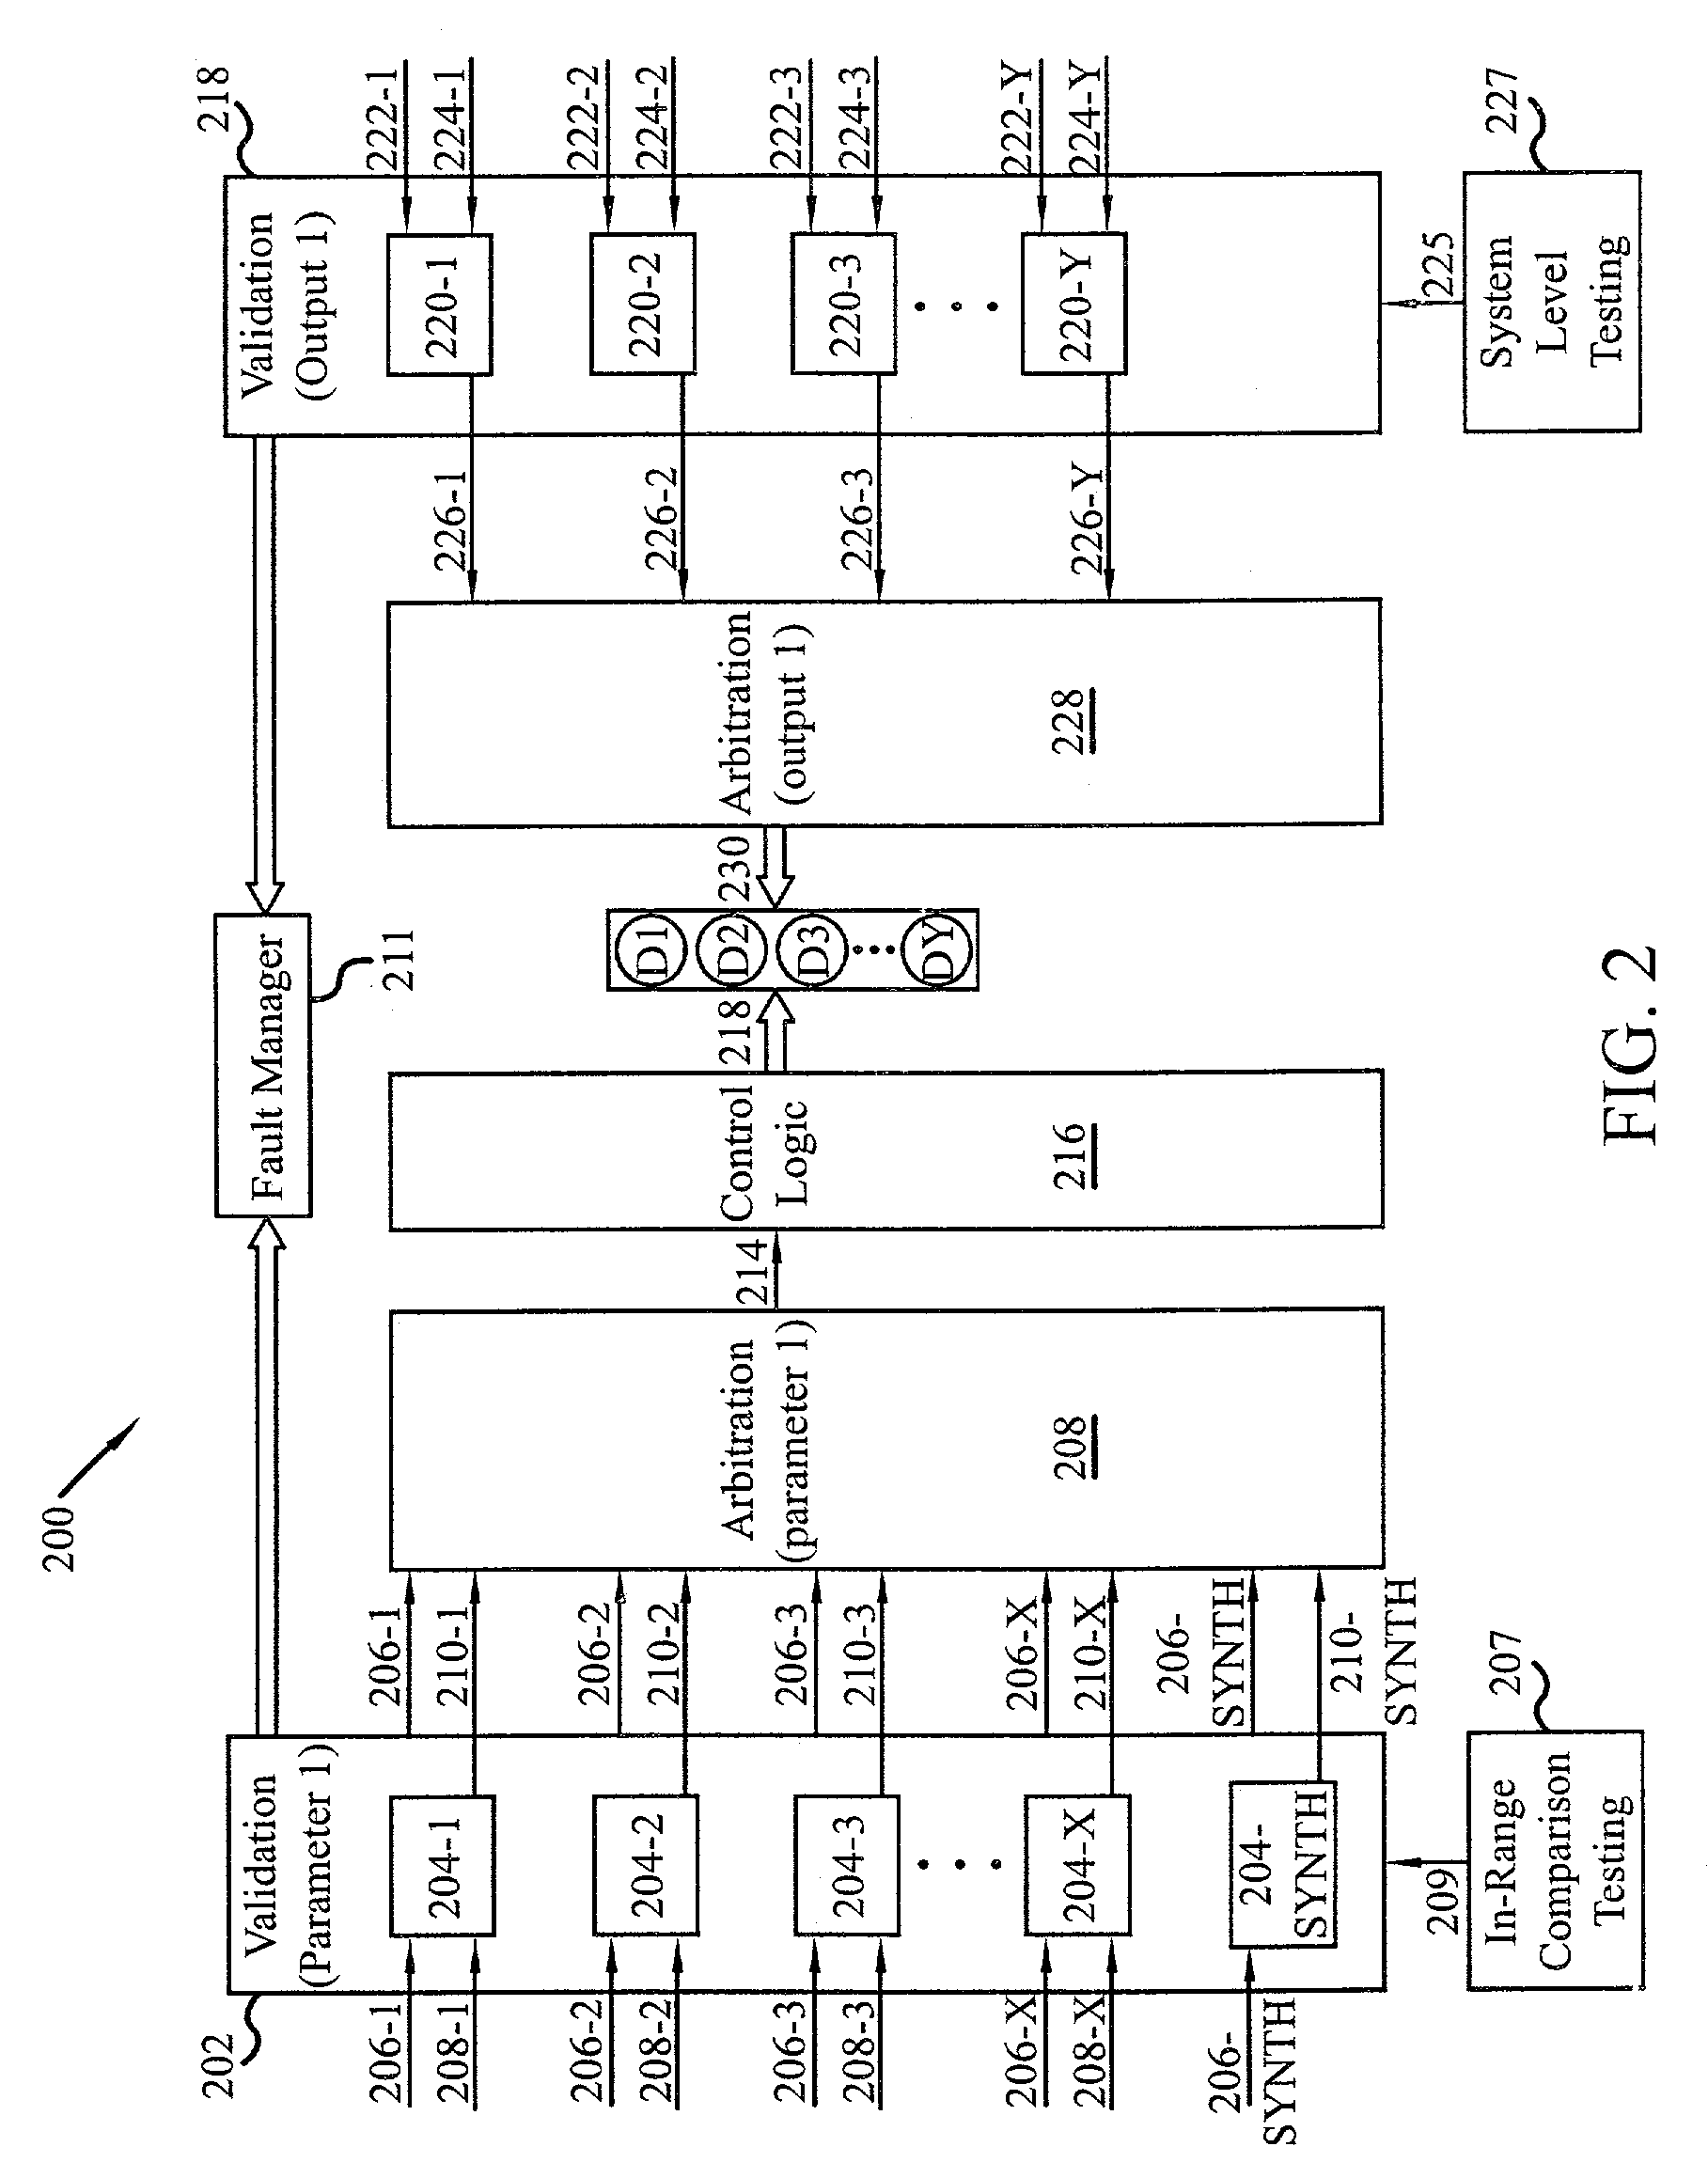 Signal validation and arbitration system and method